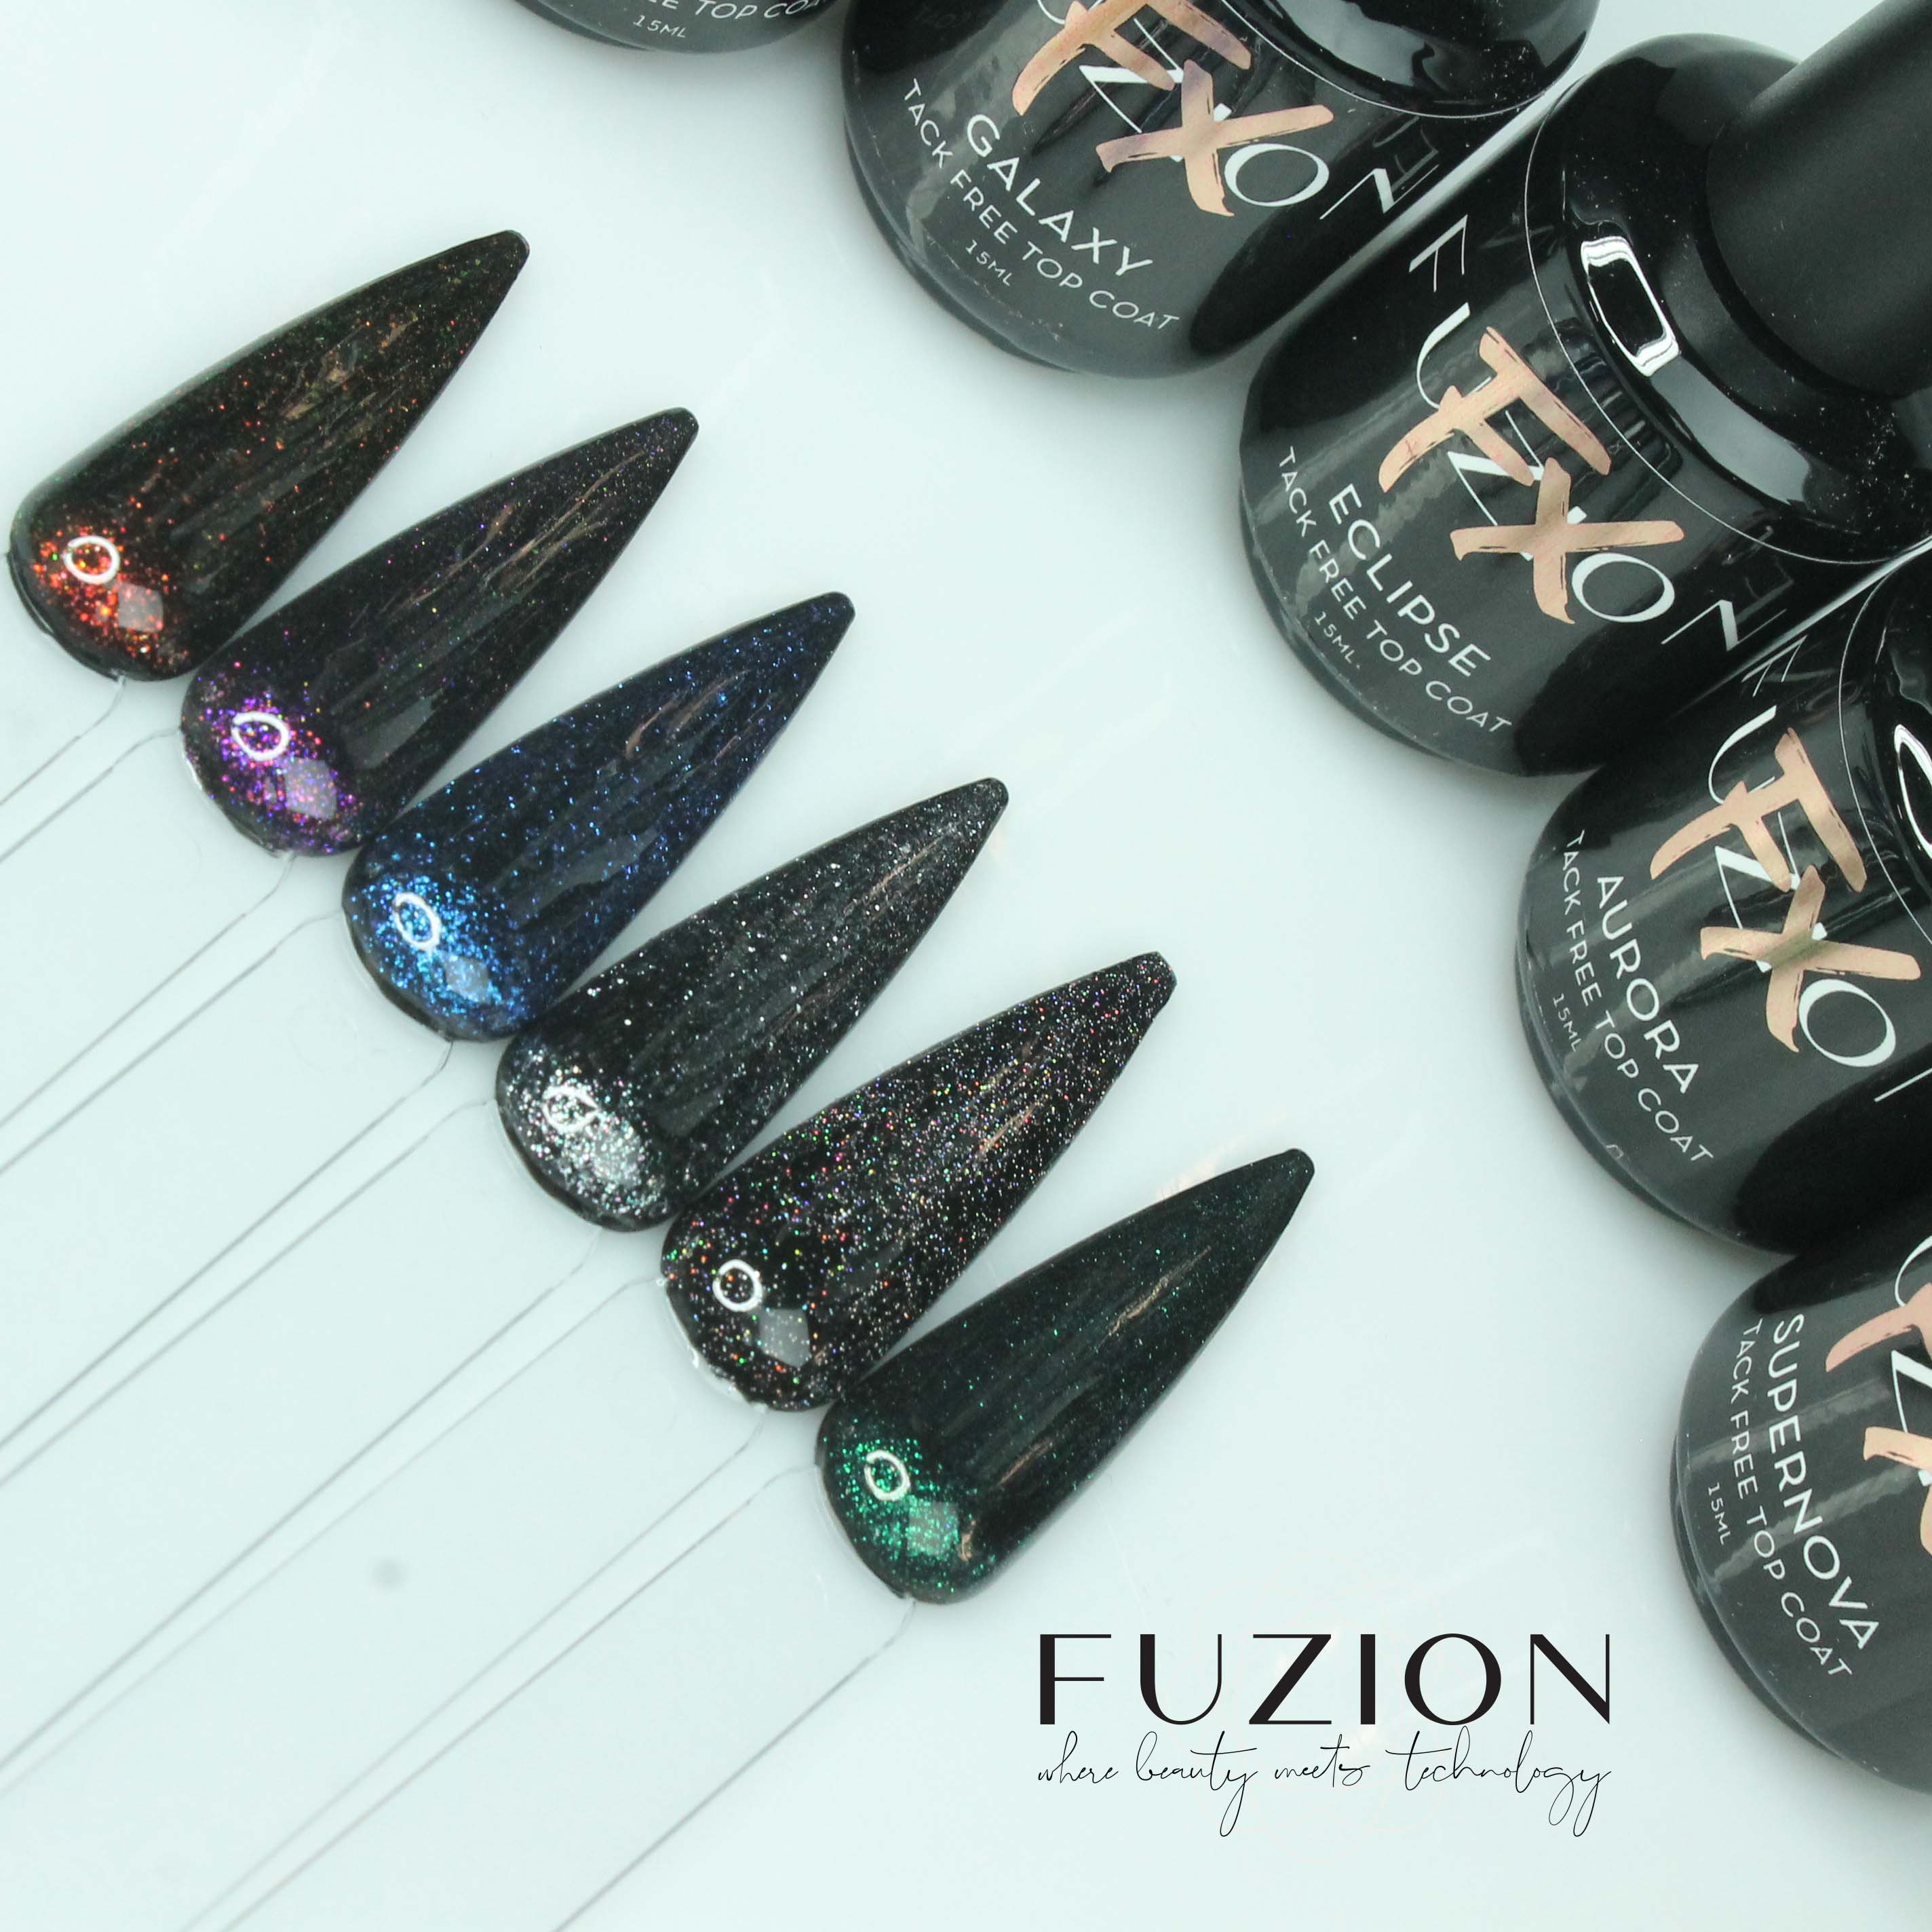 Fuzion Fall 2021 Collection - Special FX Top Coat